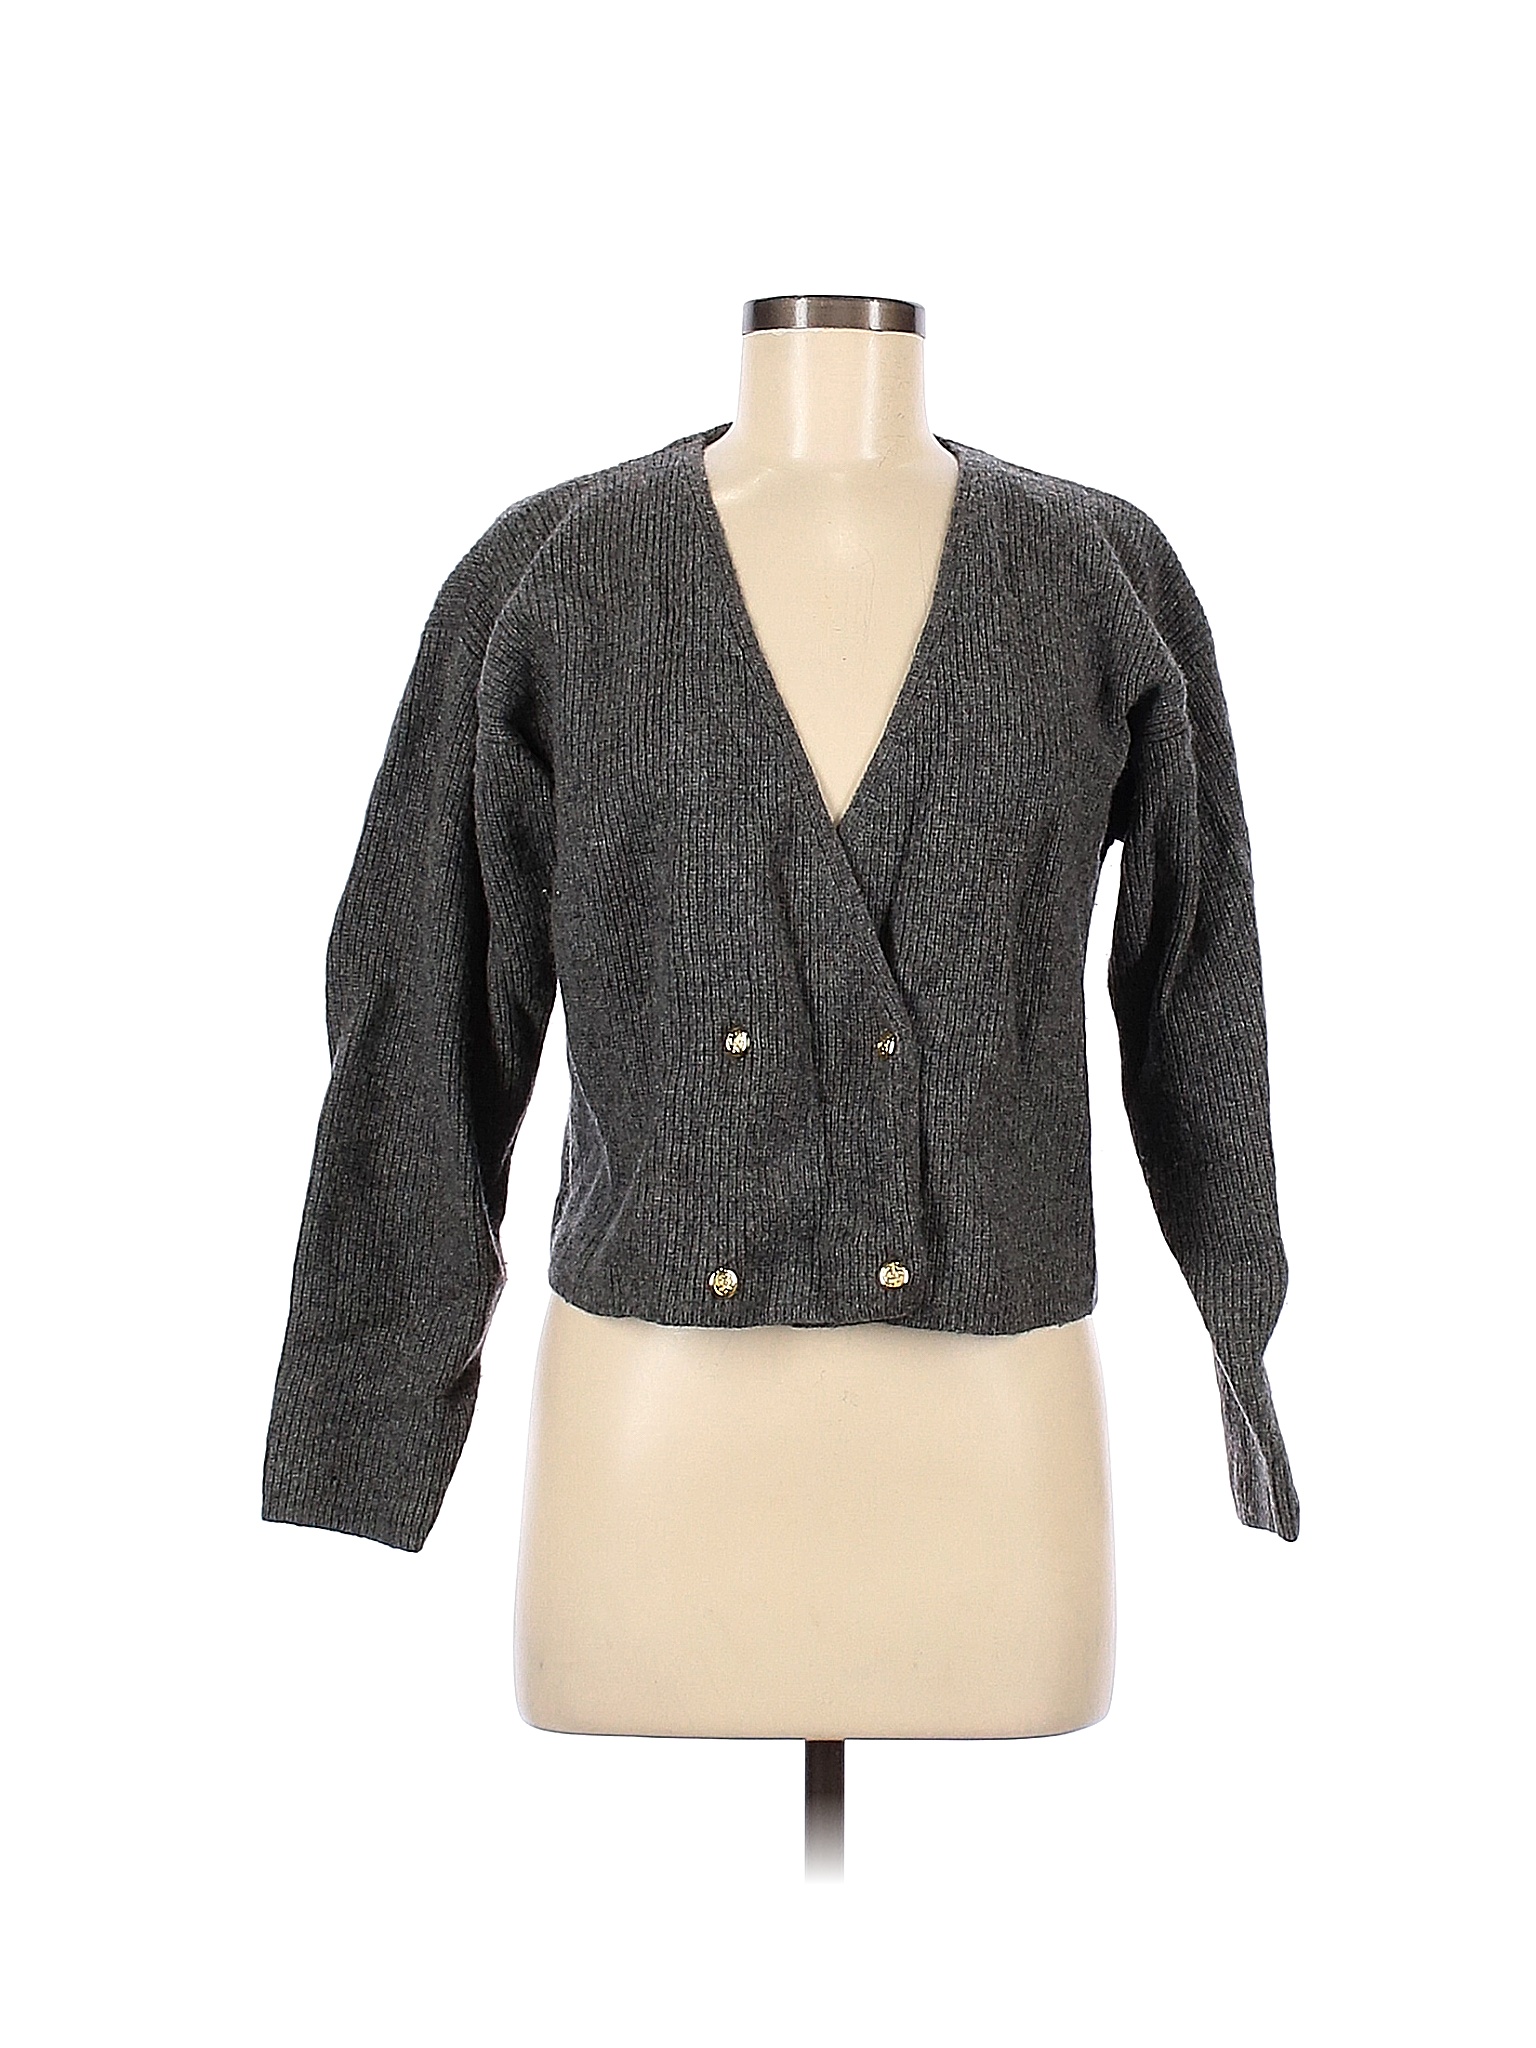 Crazy Horse Women's Sweaters On Sale Up To 90% Off Retail | thredUP